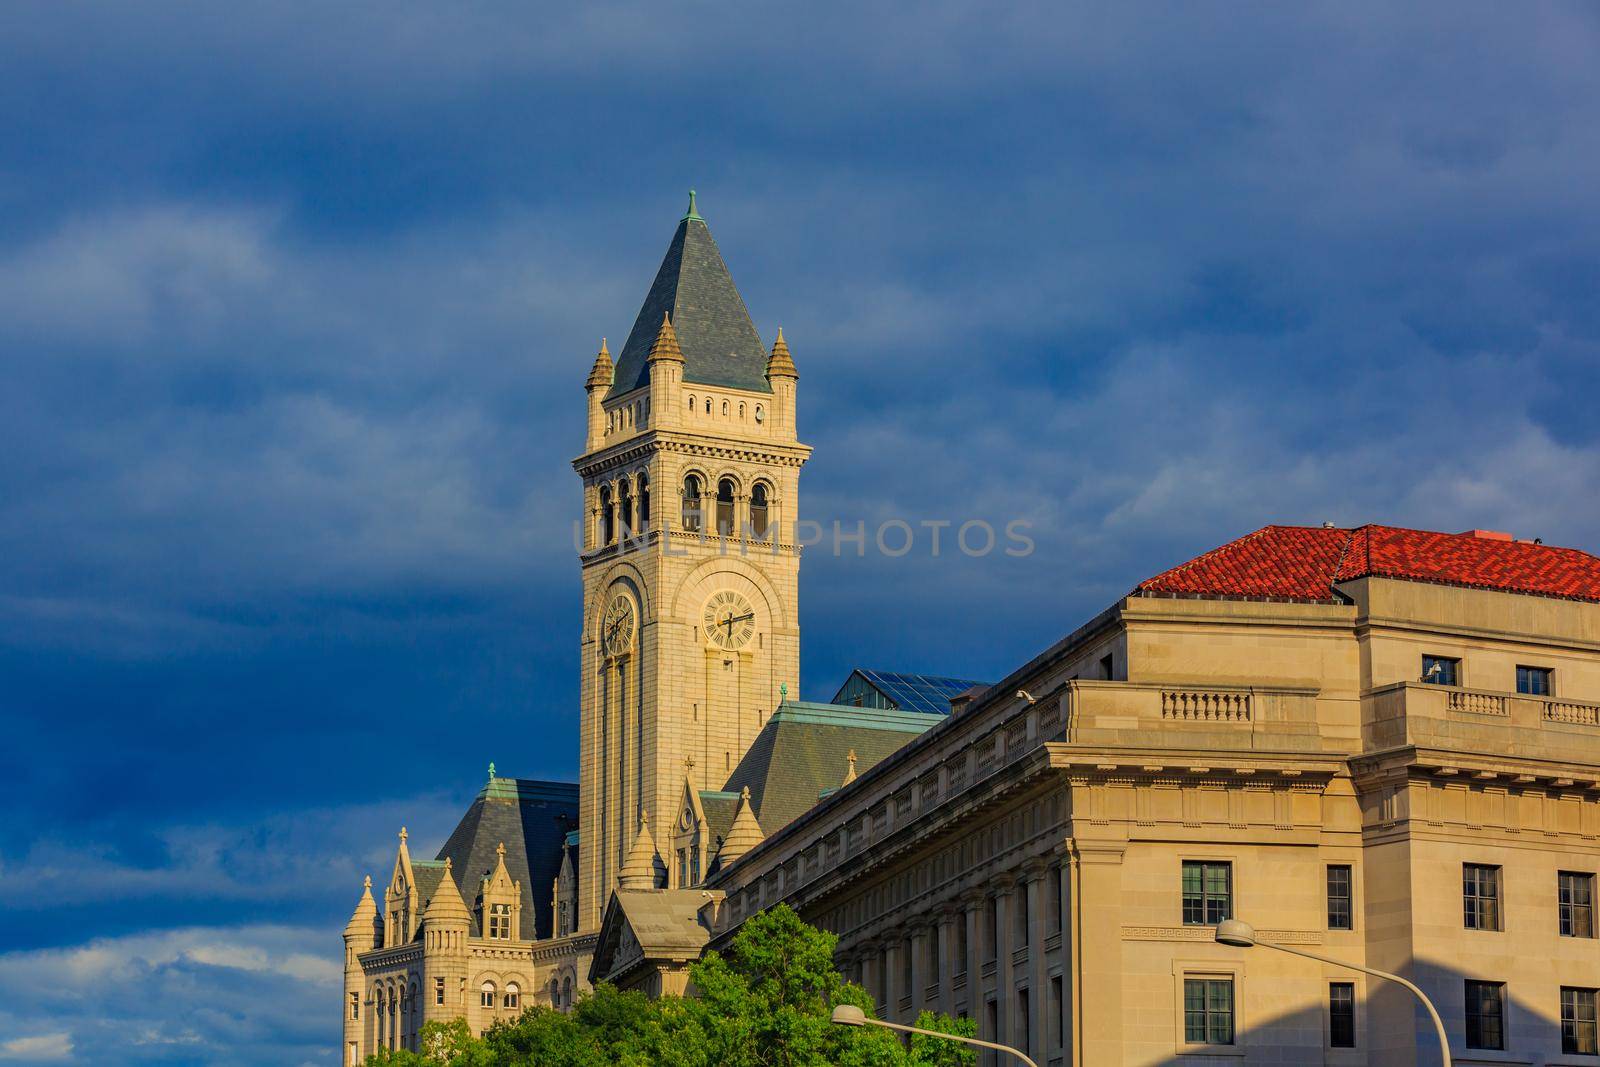 The Old Post Office Pavilion, also known as Old Post Office and Clock Tower is a historic building located in Washington, DC.